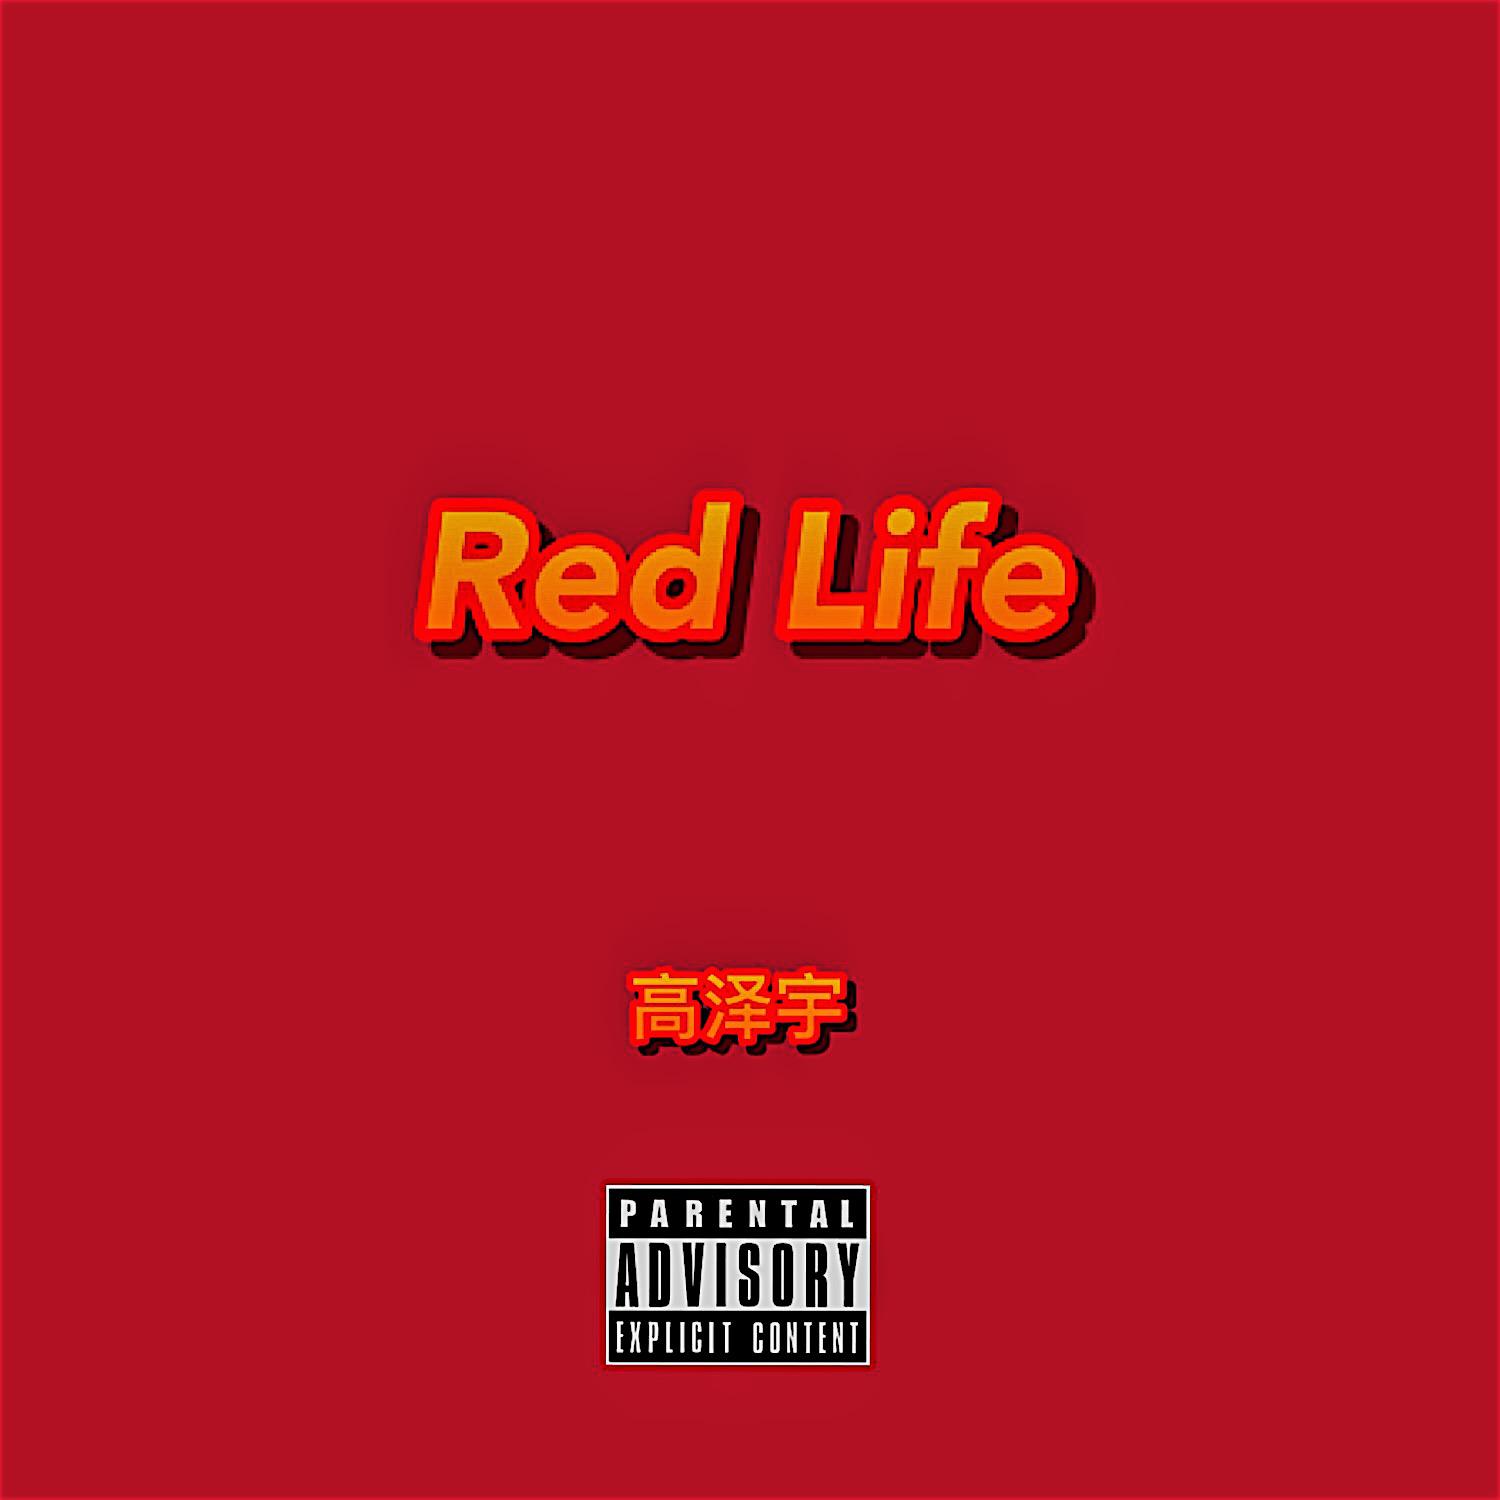 Red Life